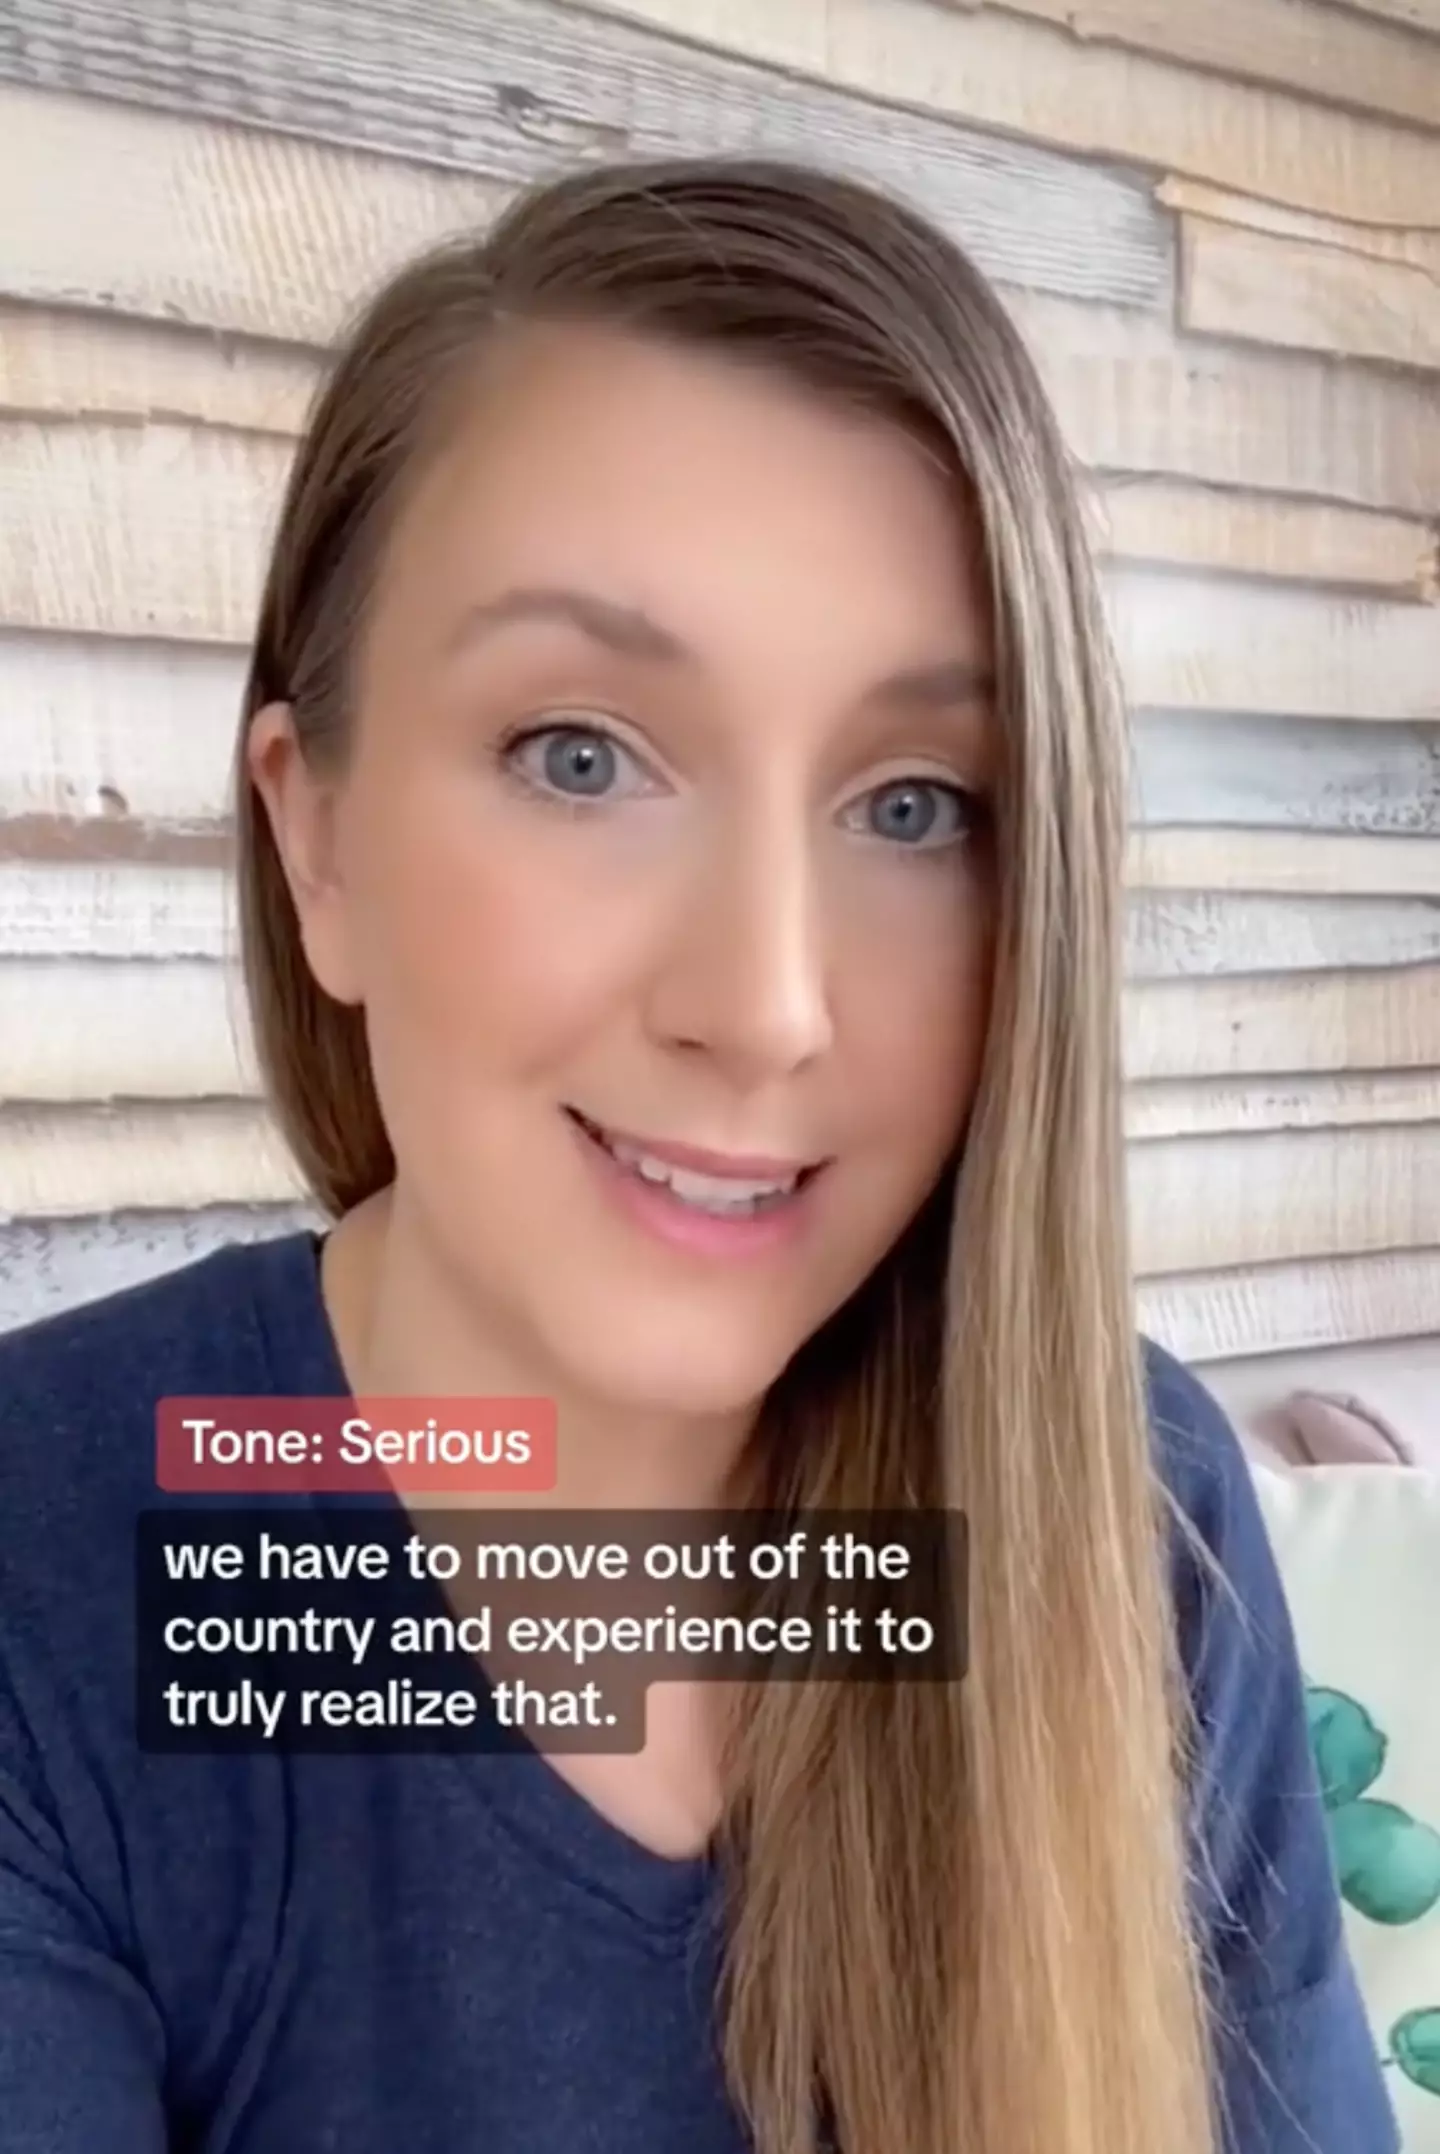 She shared her experiences of moving to the US.